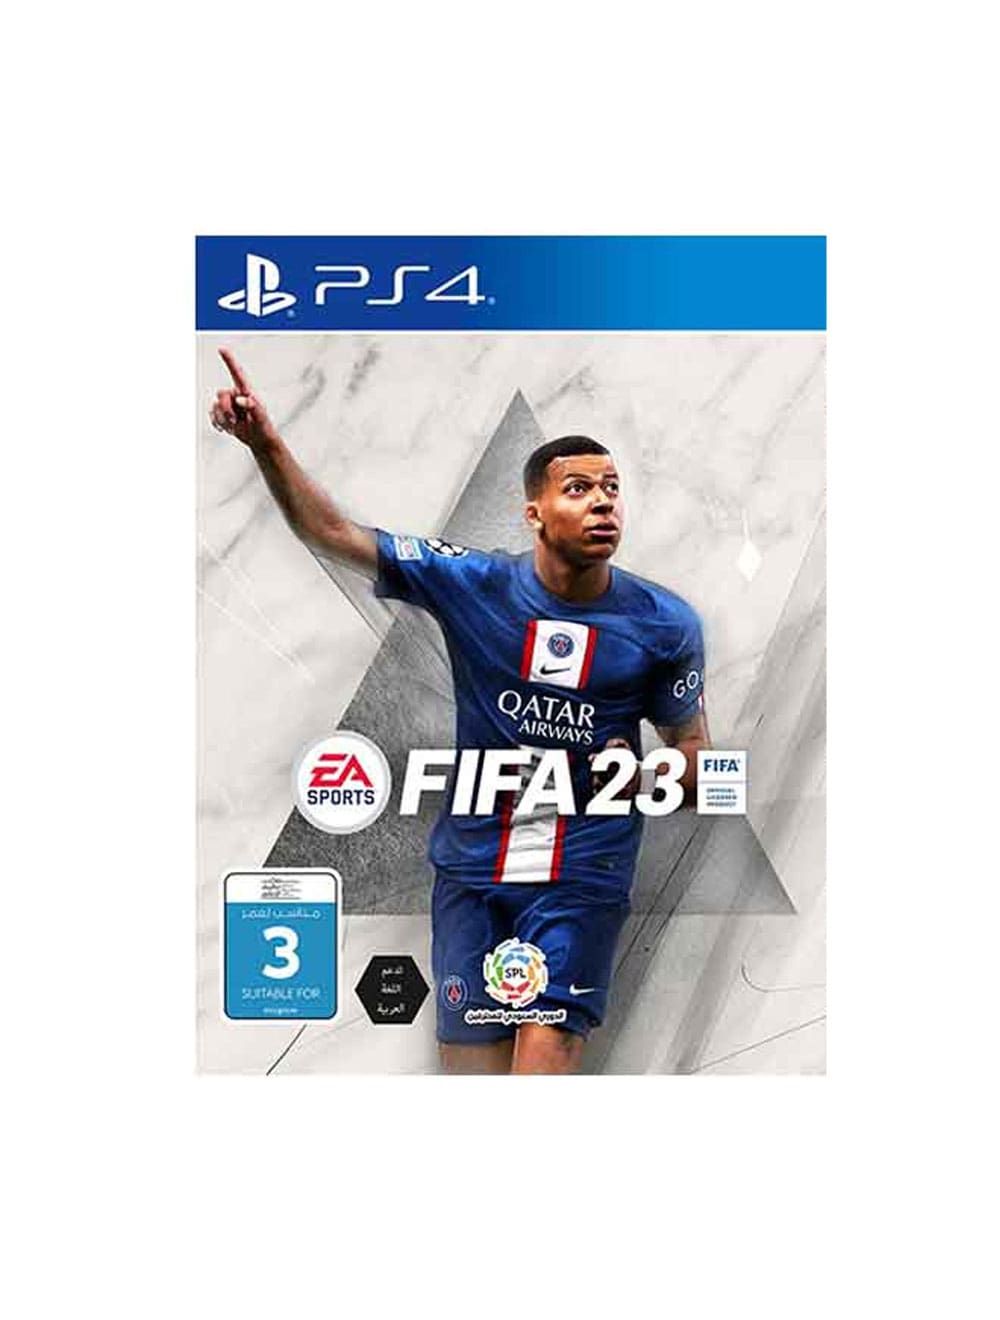 Ps4 FIFA 23 Cd in Osu - Video Games, M Black Solutions